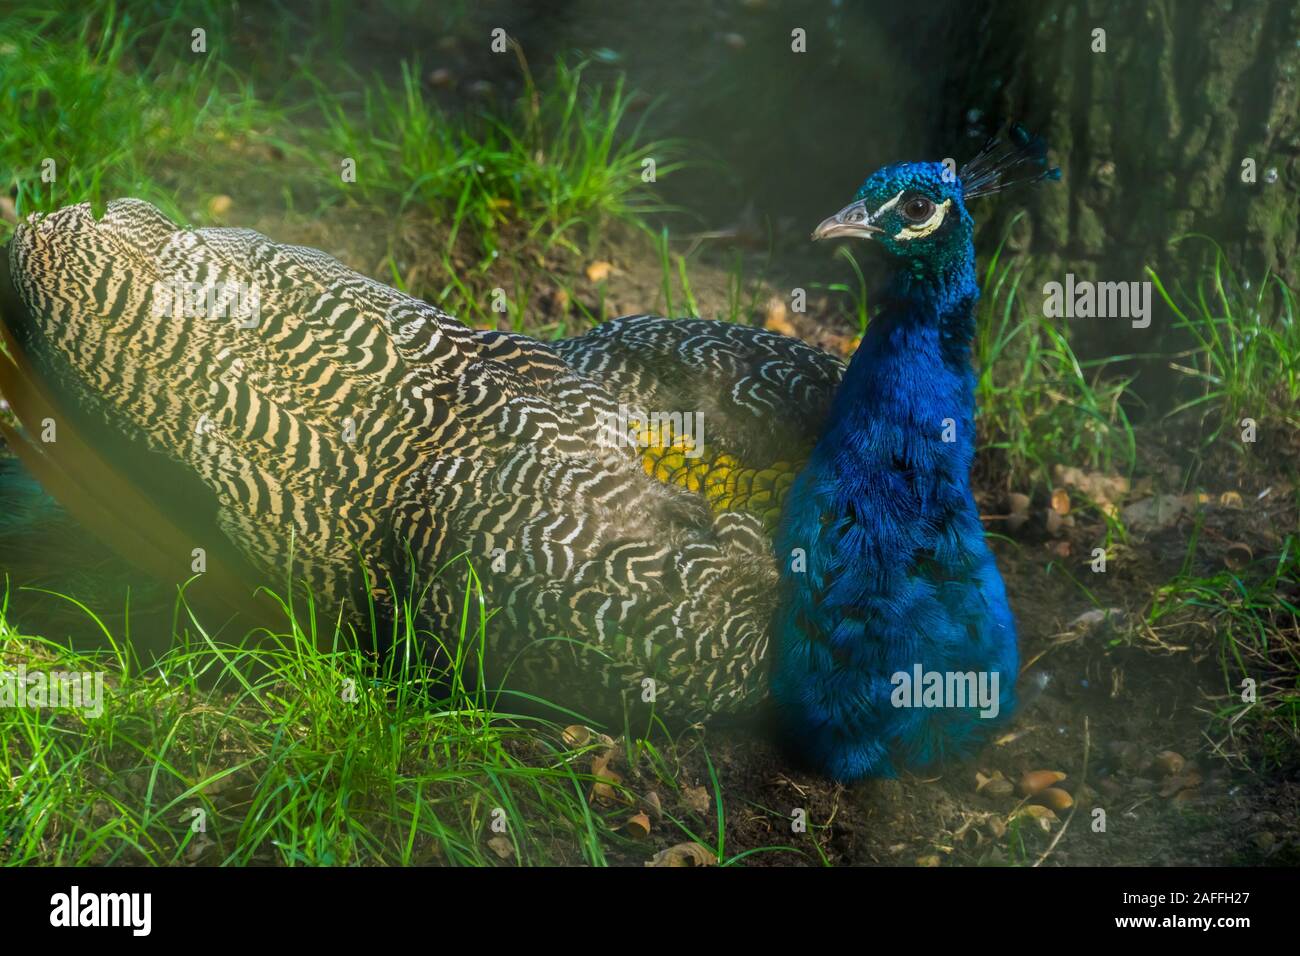 Blue Indian peafowl in closeup, Colorful ornamental bird, tropical bird specie from Asia Stock Photo